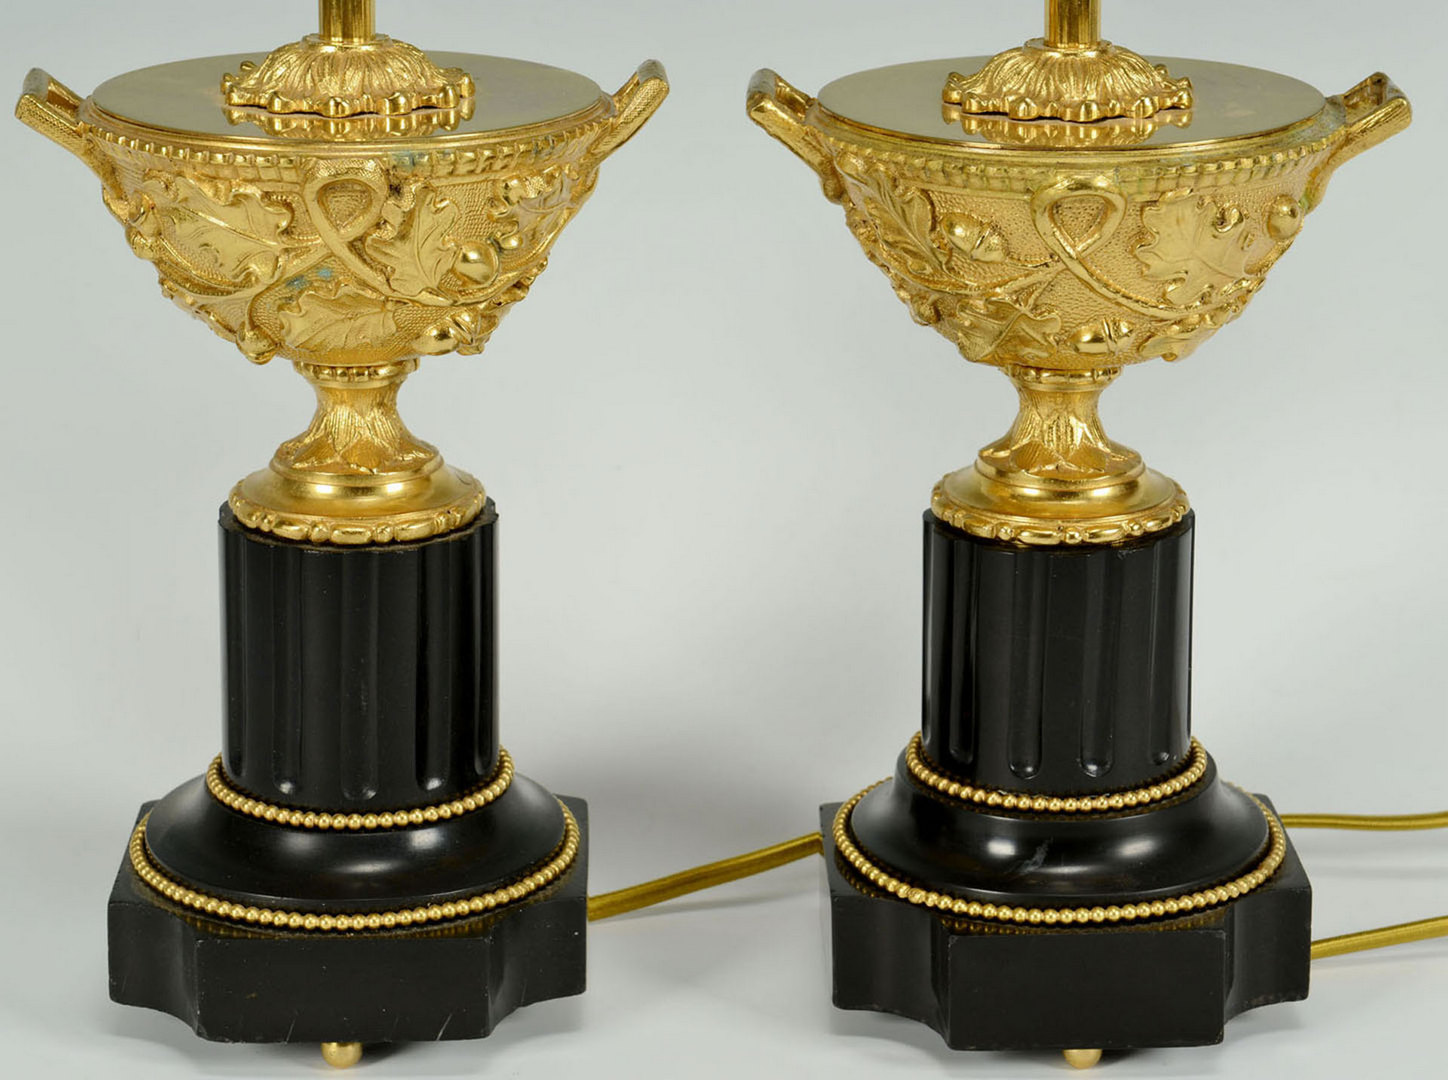 Lot 383: Grouping of 3 Gilt & Onyx Table Lamps